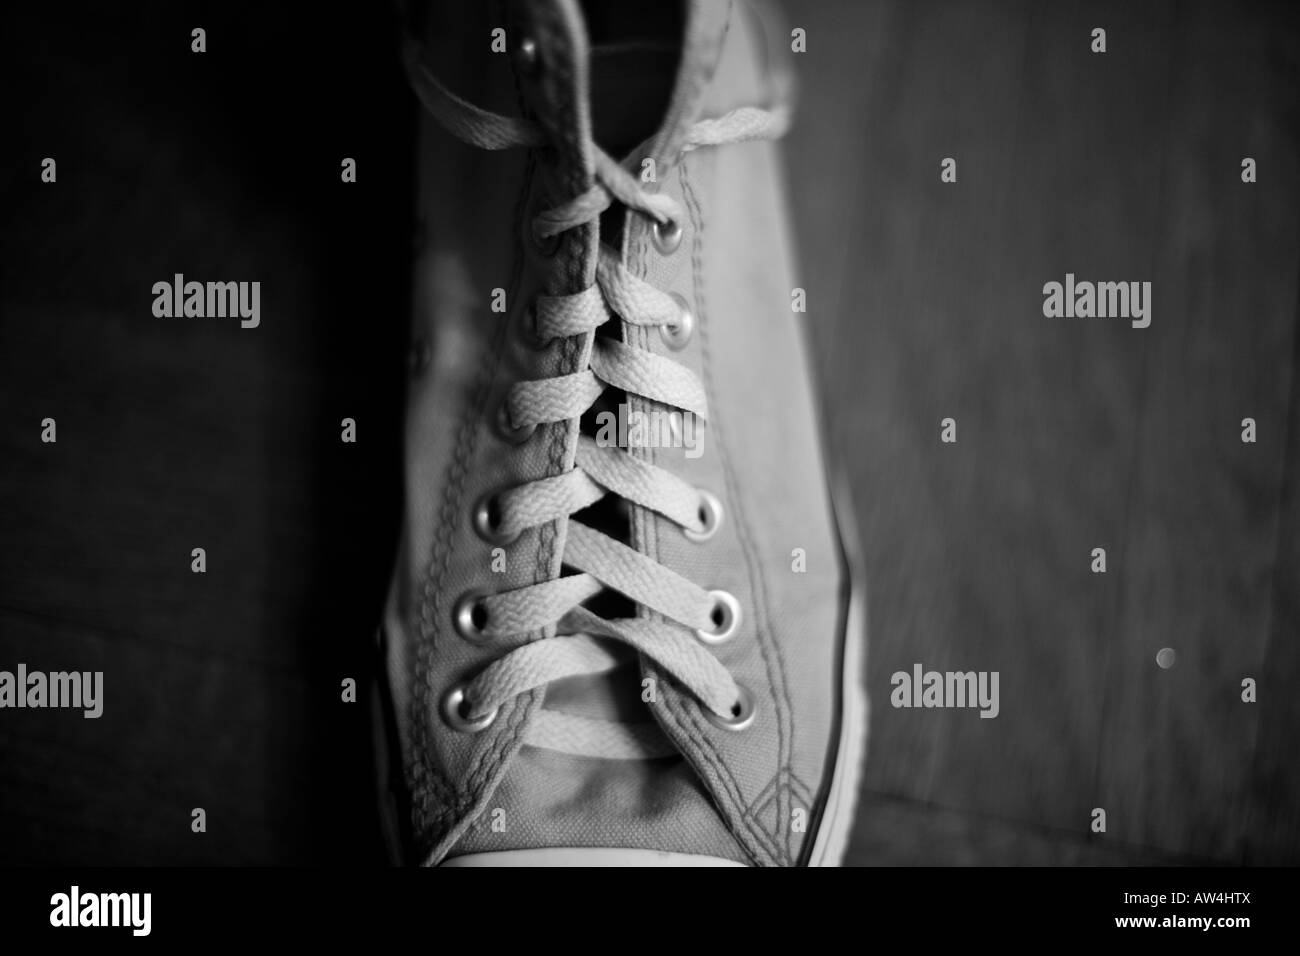 Shoes shoe detail Black and White Stock Photos & Images - Alamy